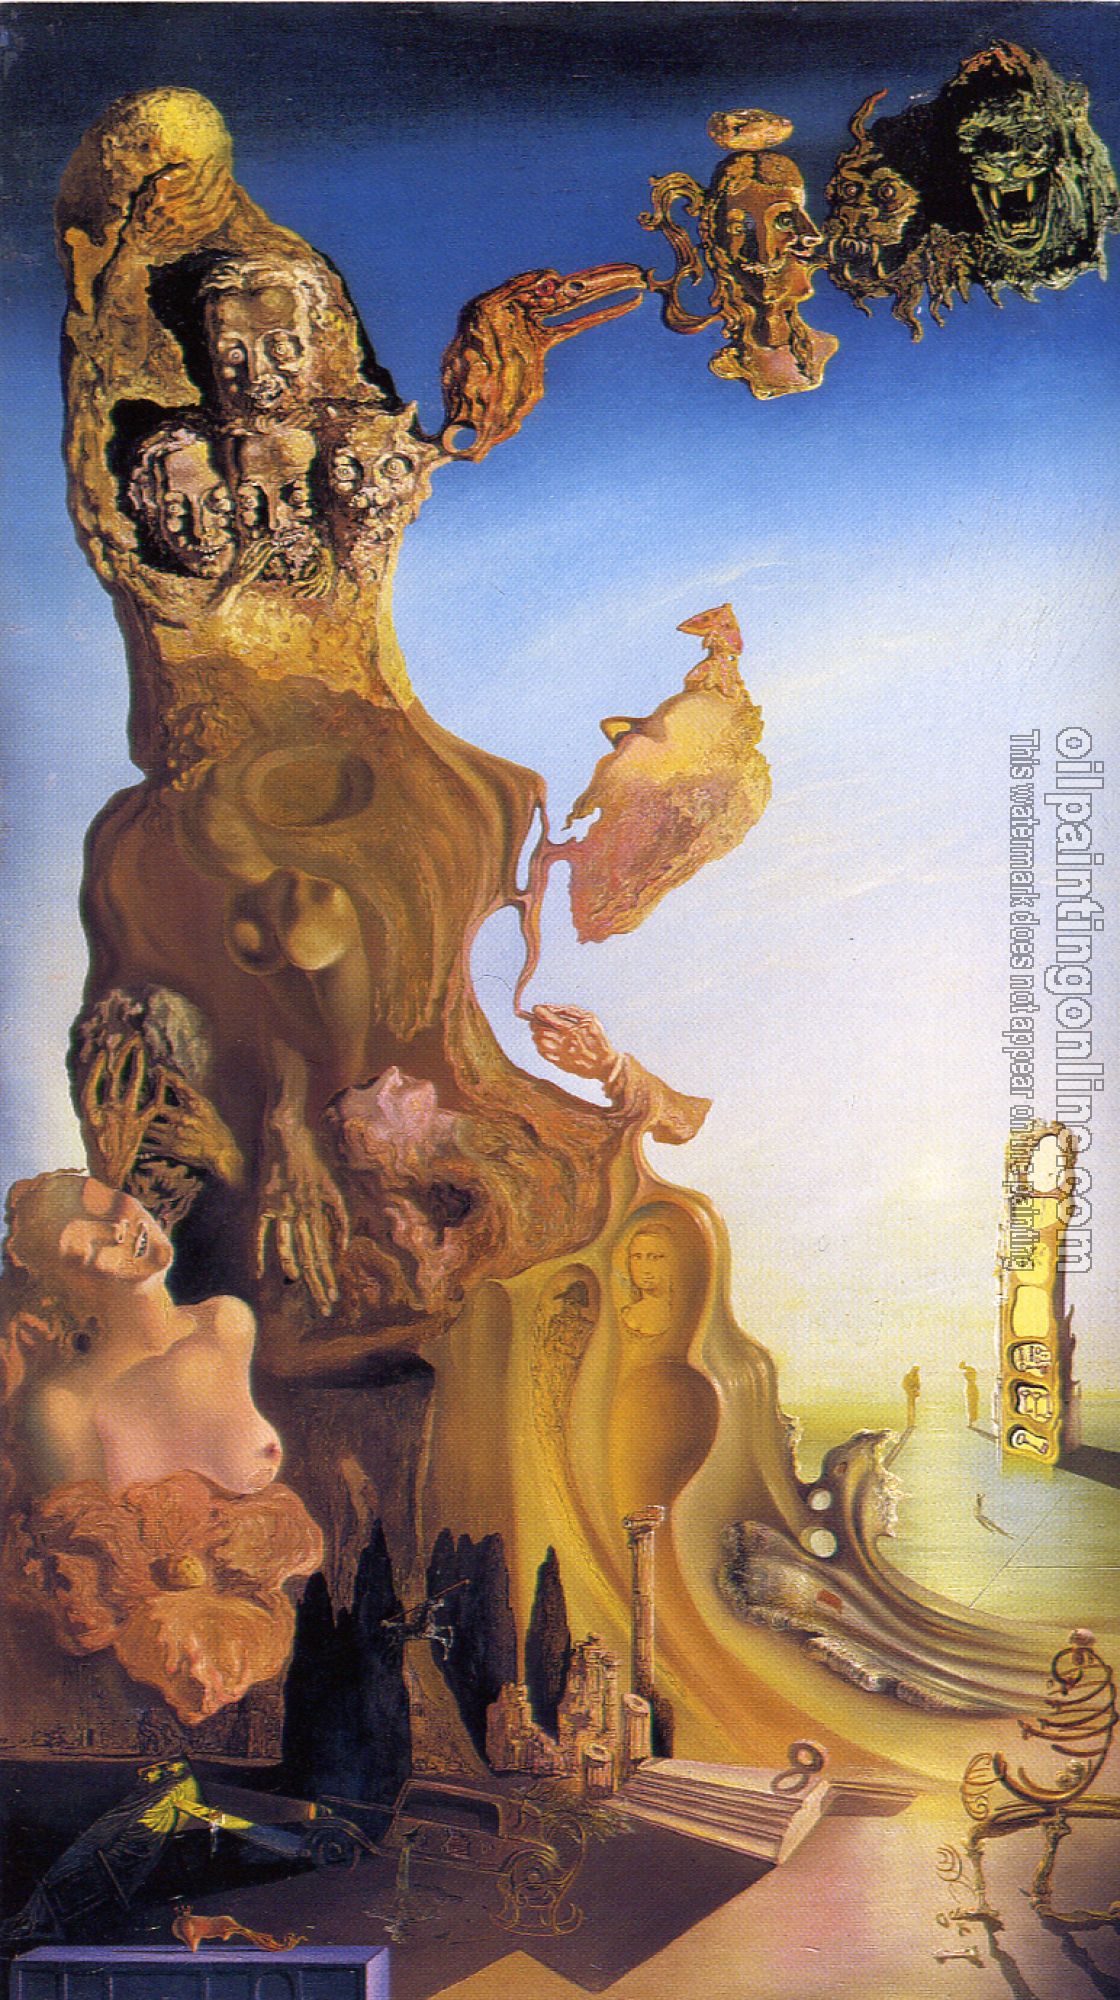 Dali, Salvador - Imperial Monument to the Child-Woman